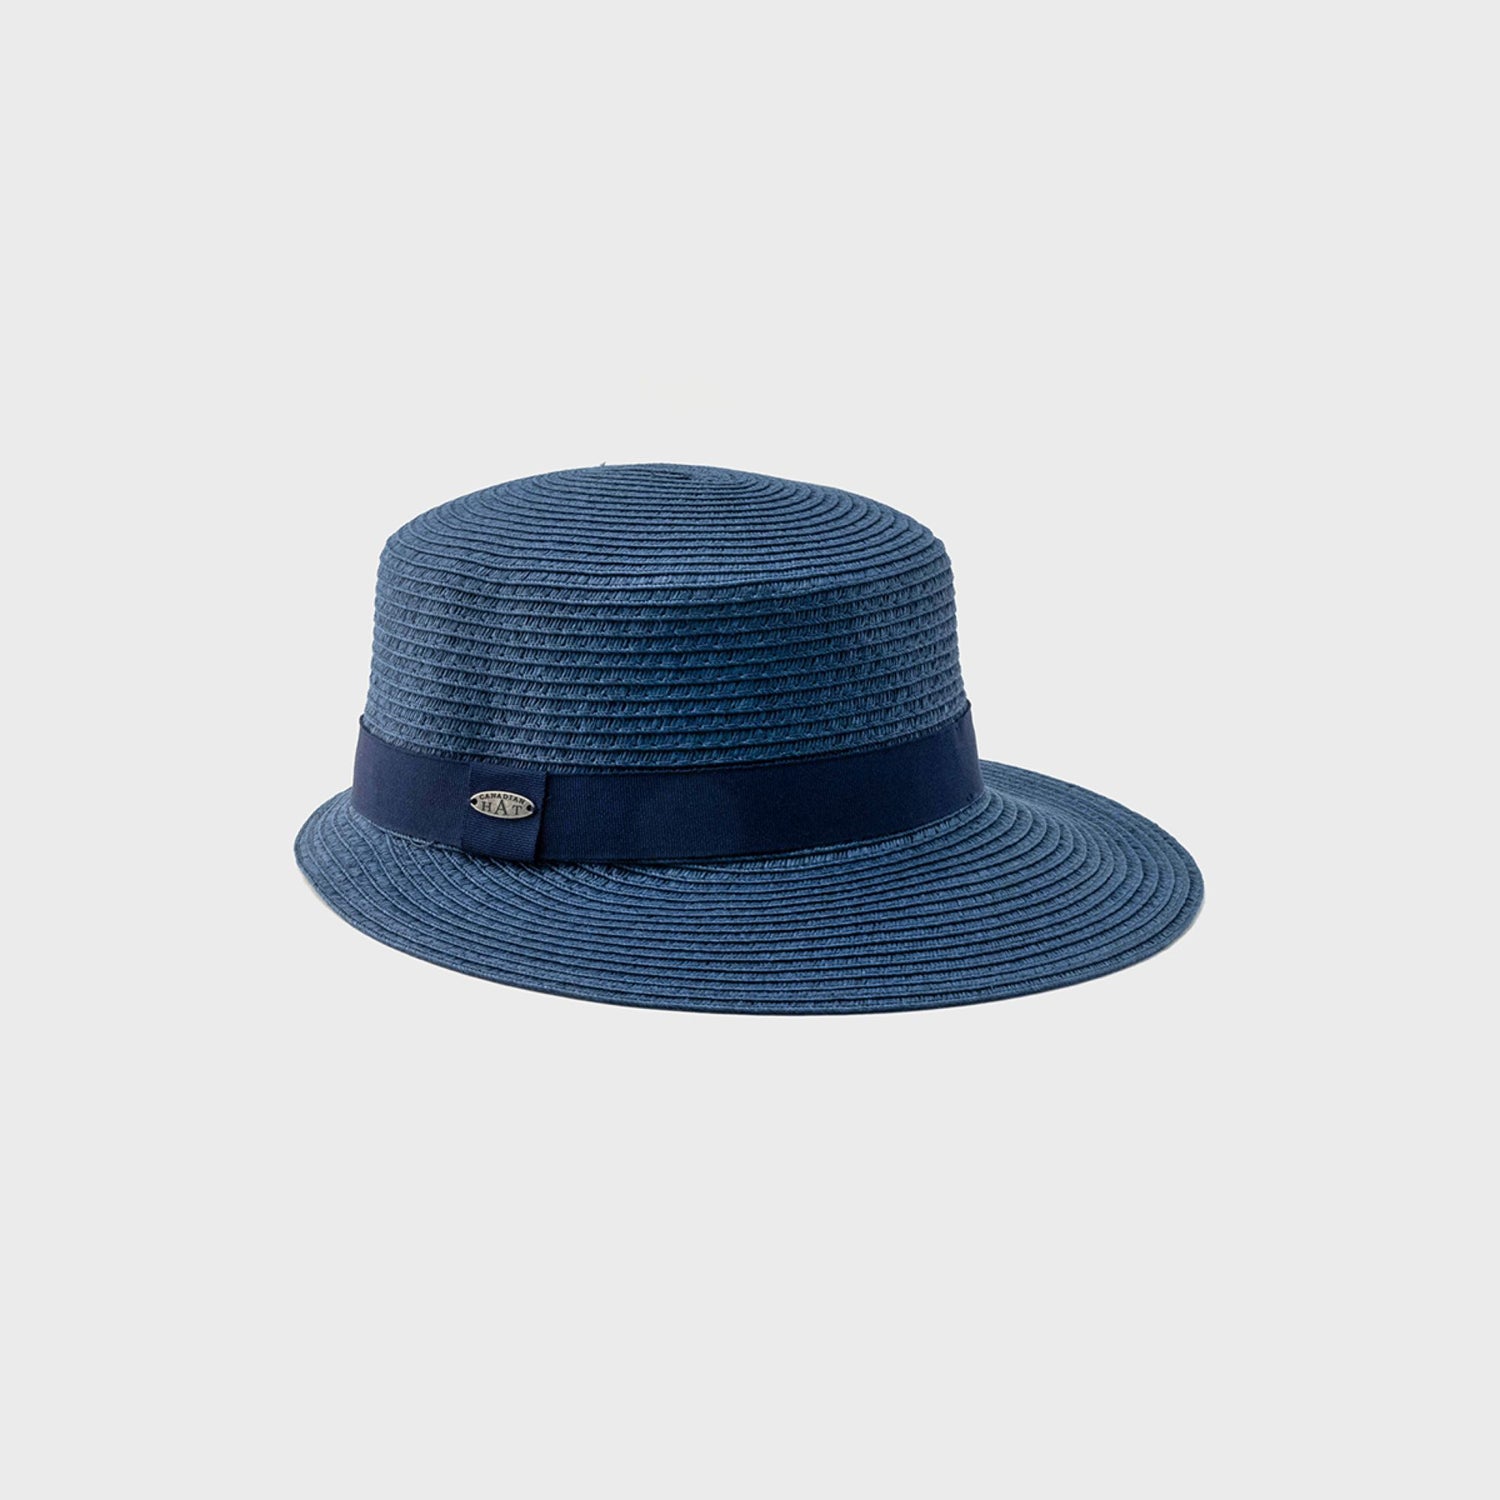 CLEONIE - LARGE CAP WITH RIBBON